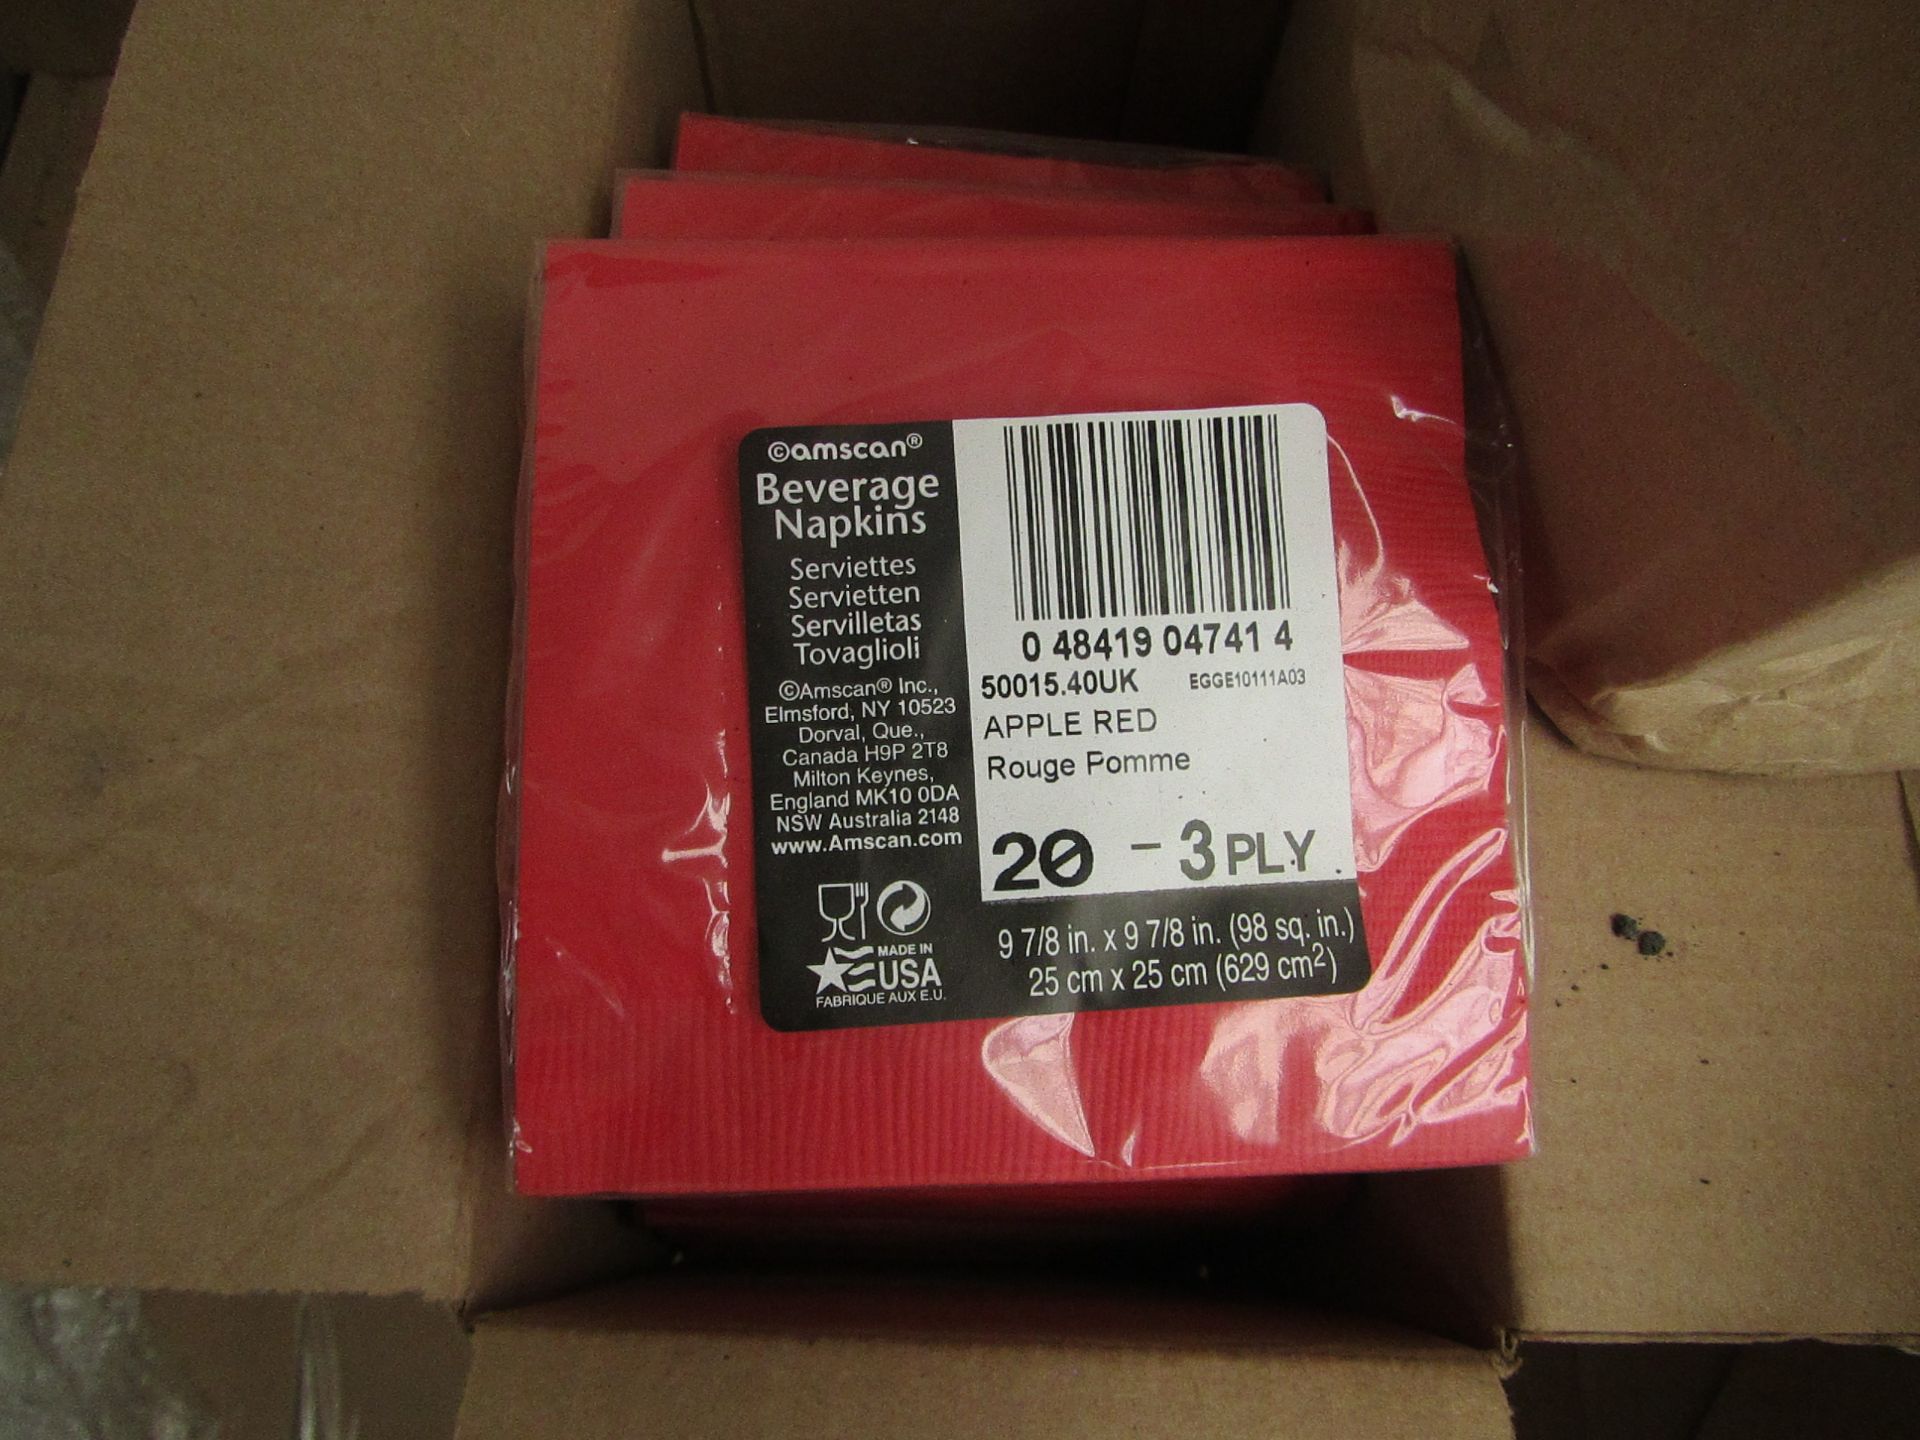 4x Boxes of Beverage Napkins, Apple Red (see image for design) New & Boxed.